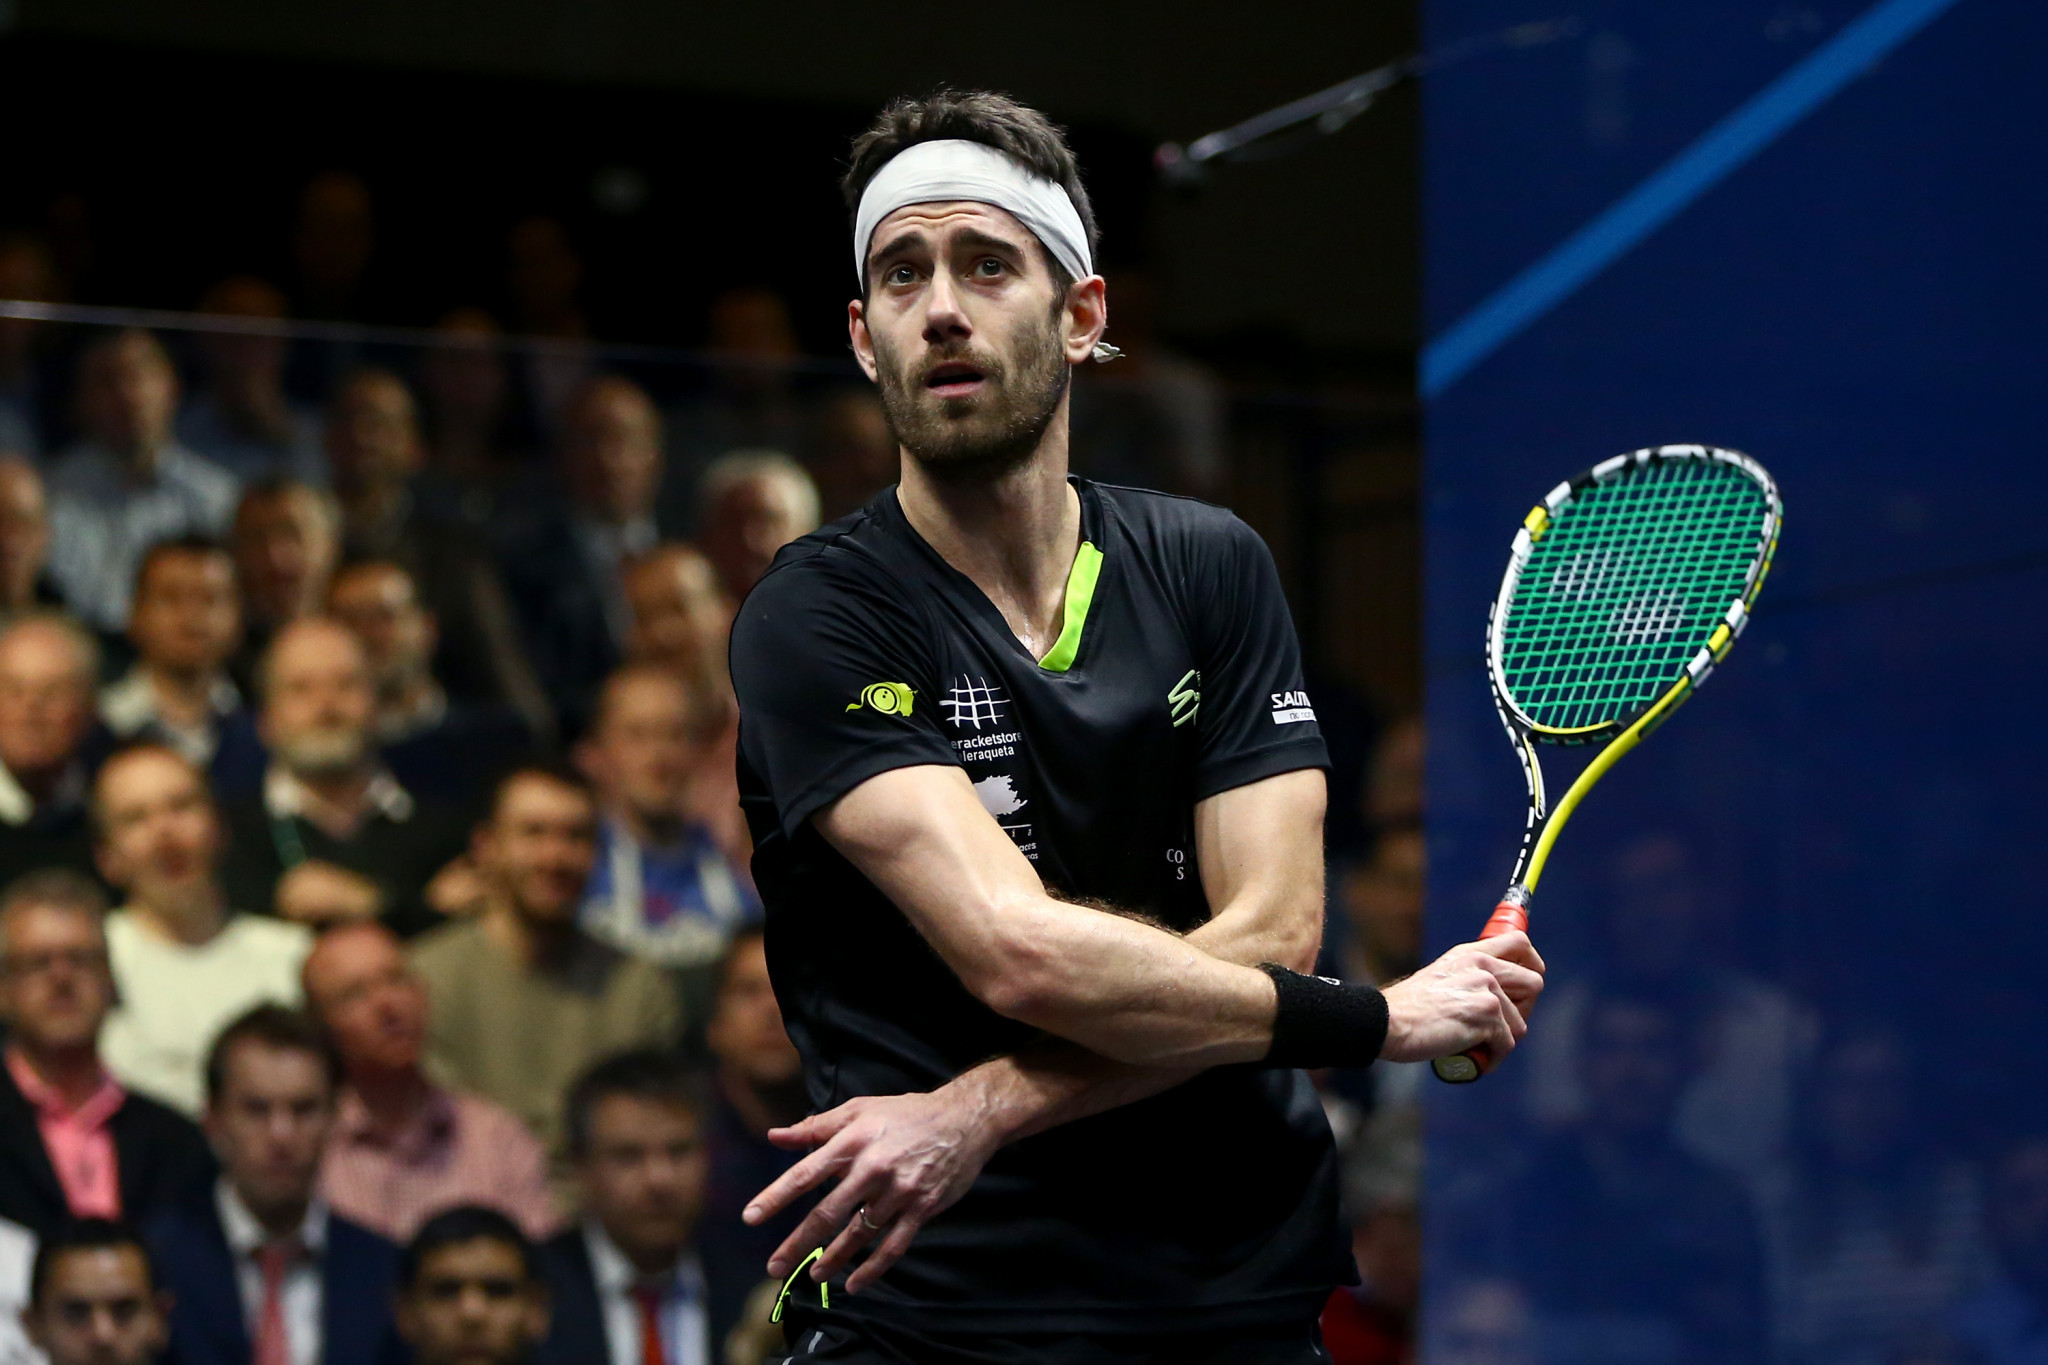 Golan wins veteran battle to set up tie with top seed Elshorbagy at PSA Canary Wharf Classic 